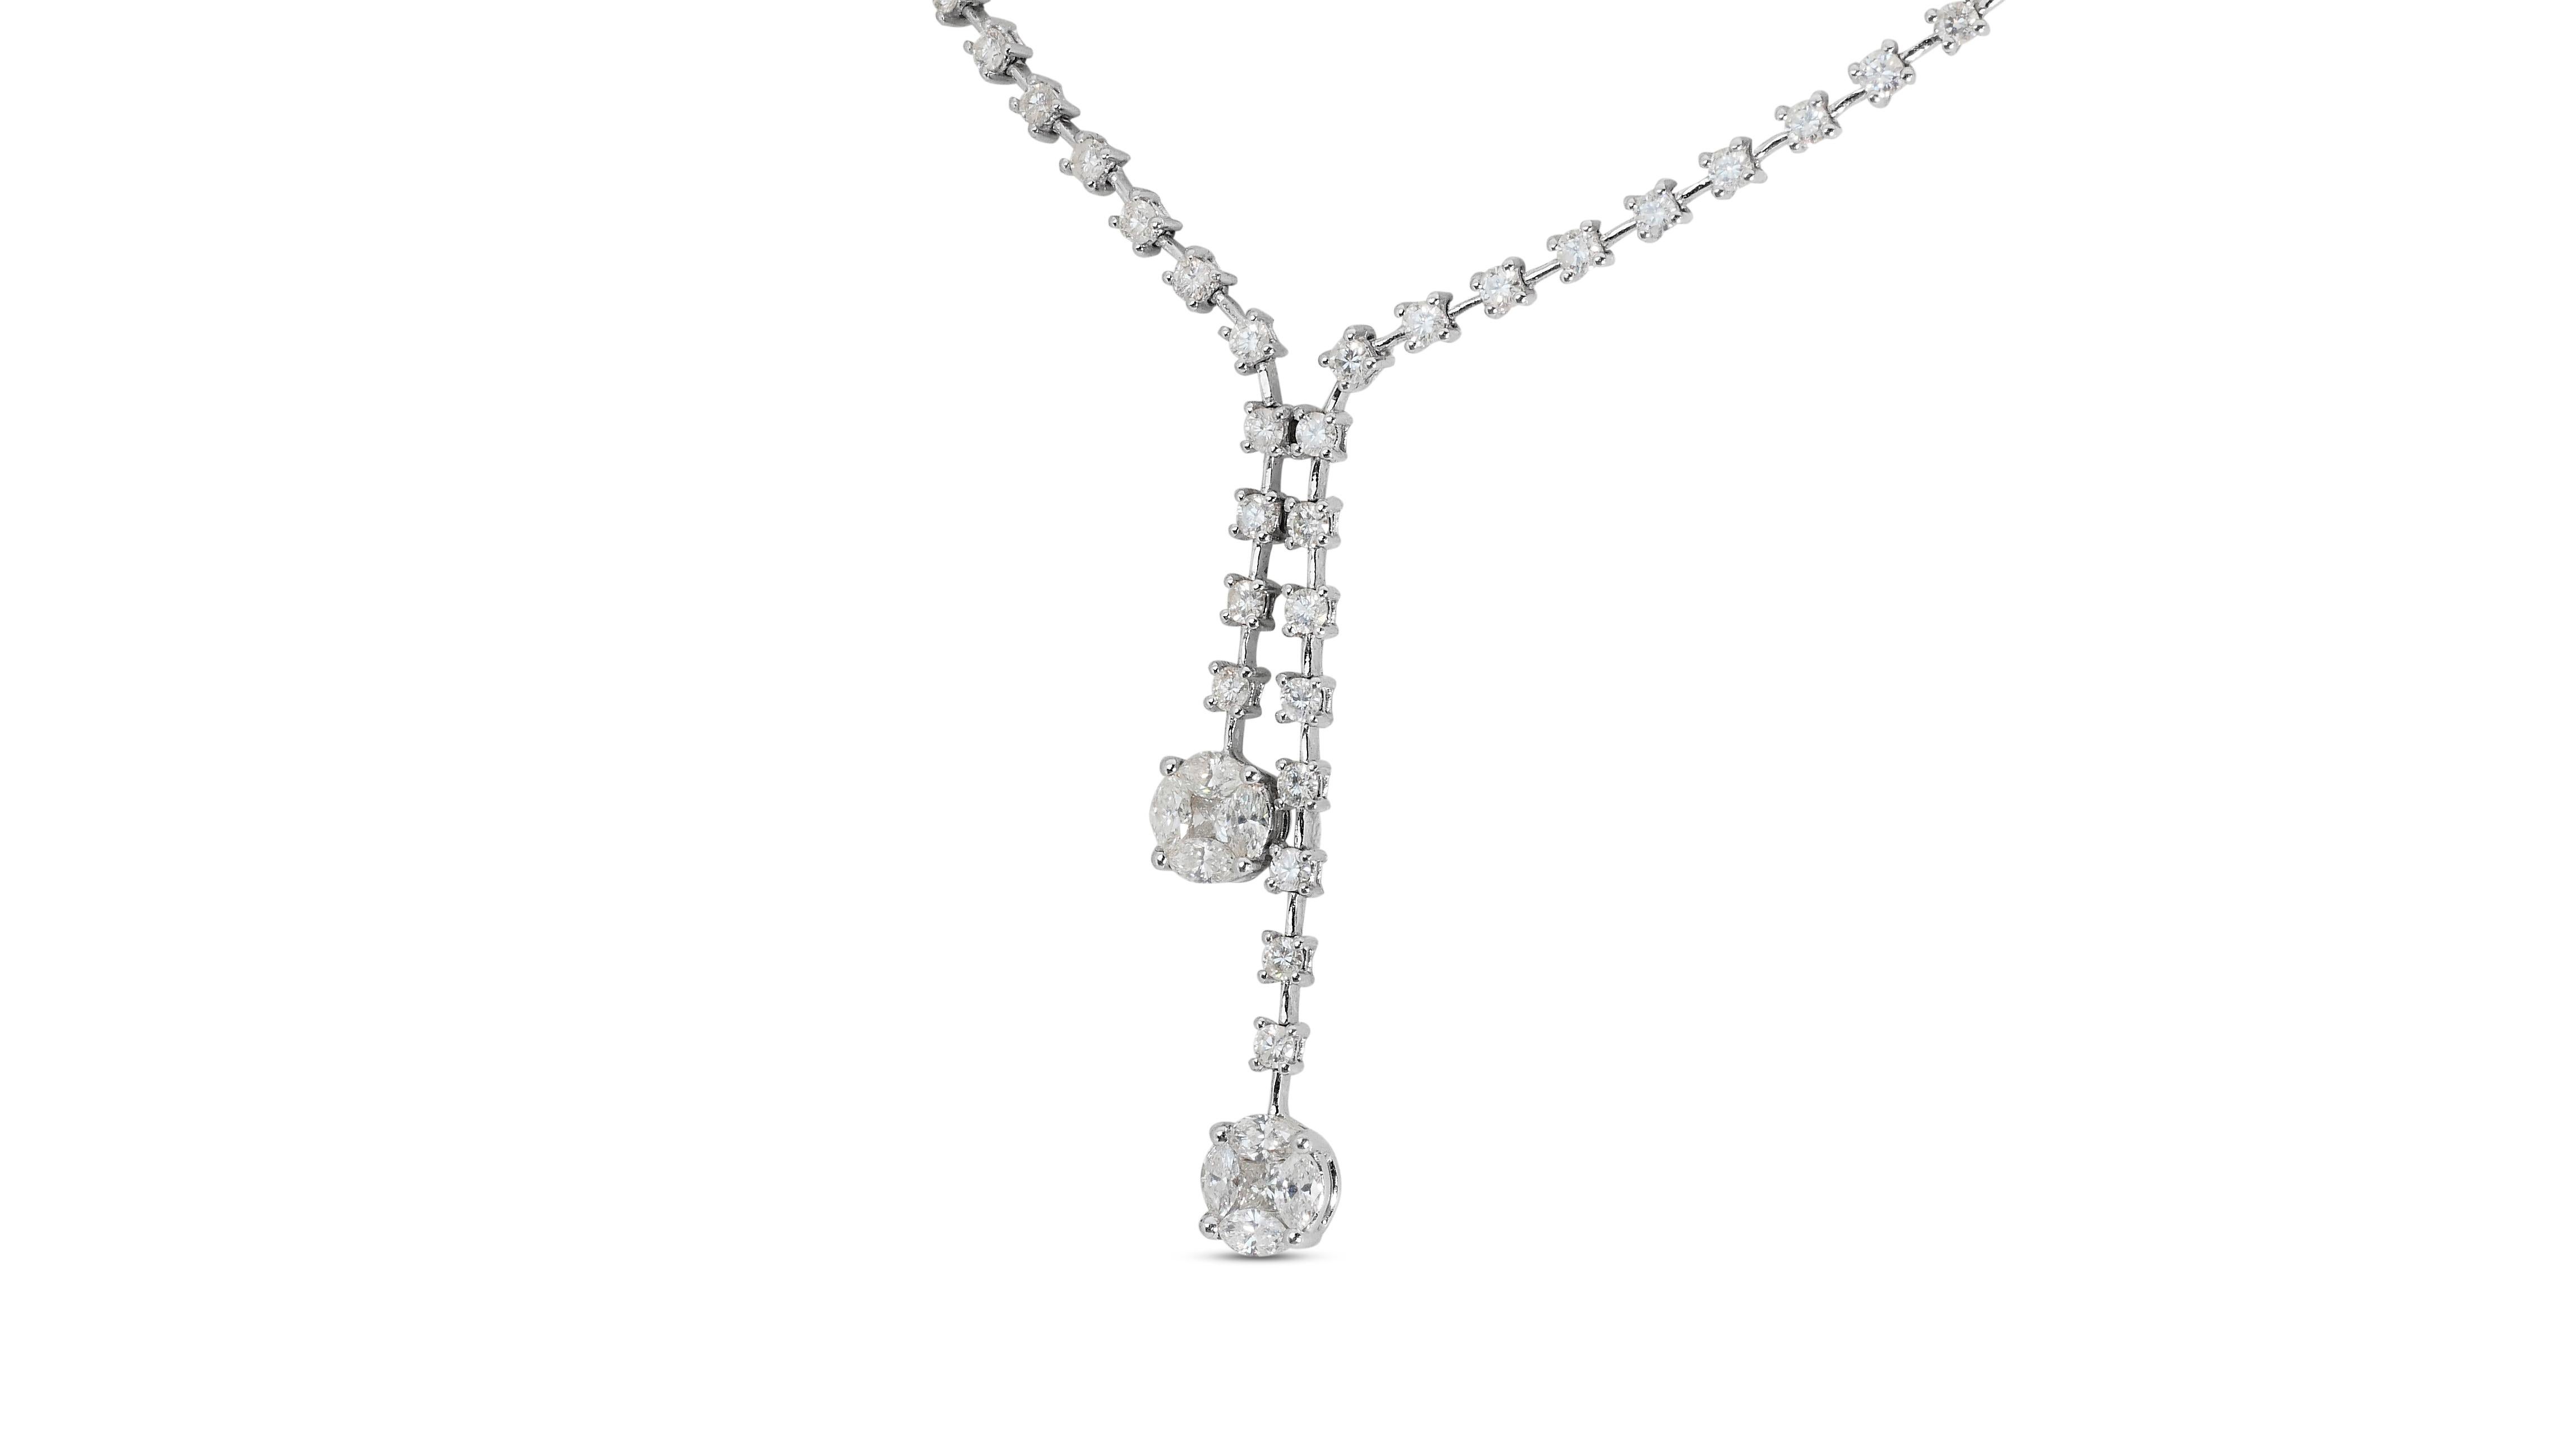 Glamorous 18k White Gold Drop Necklace w/ 5.06ct Natural Diamonds IGI Cert In Excellent Condition For Sale In רמת גן, IL